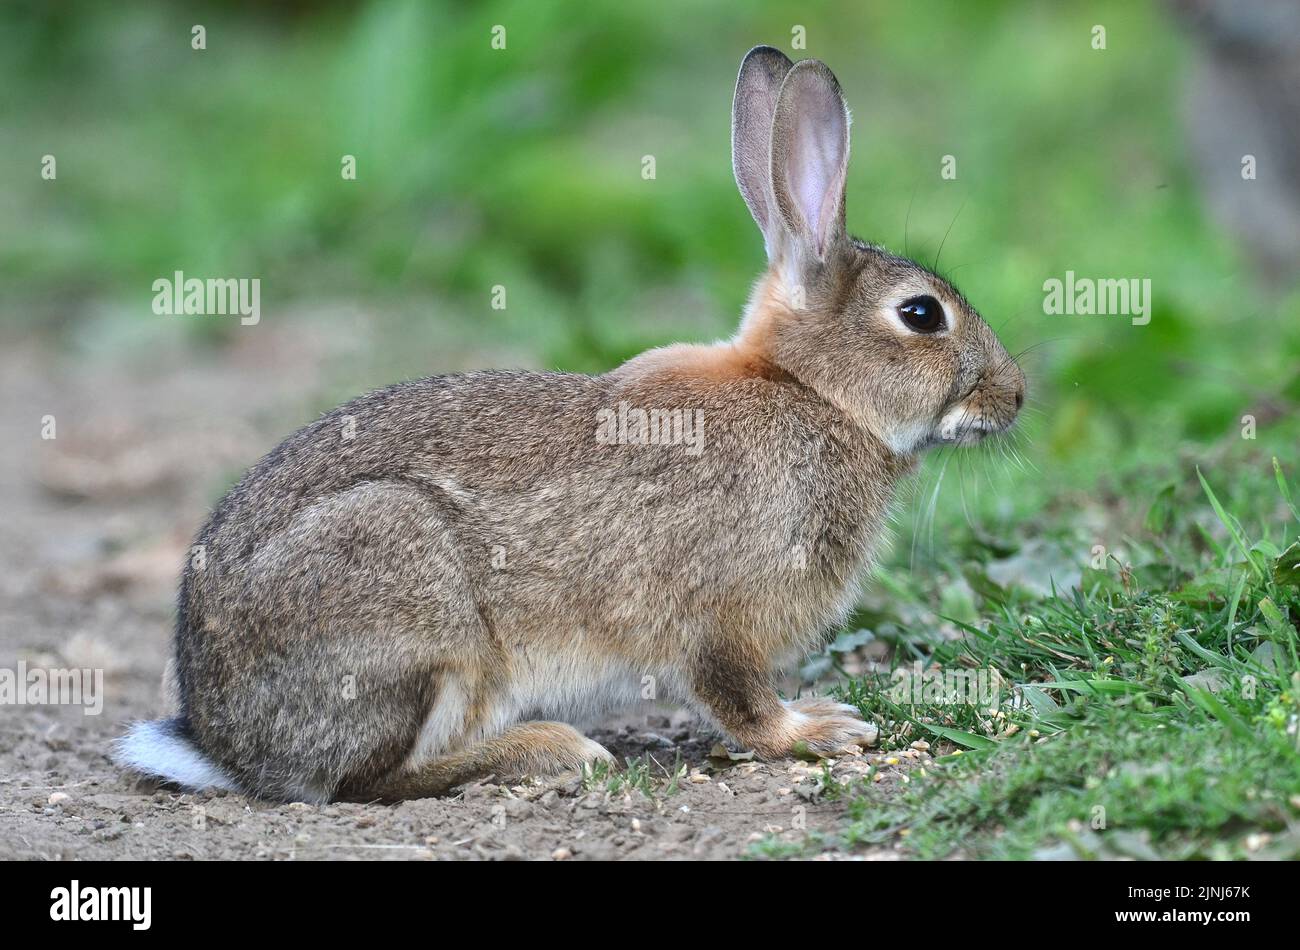 Young rabbit grazing in rough ground Stock Photo